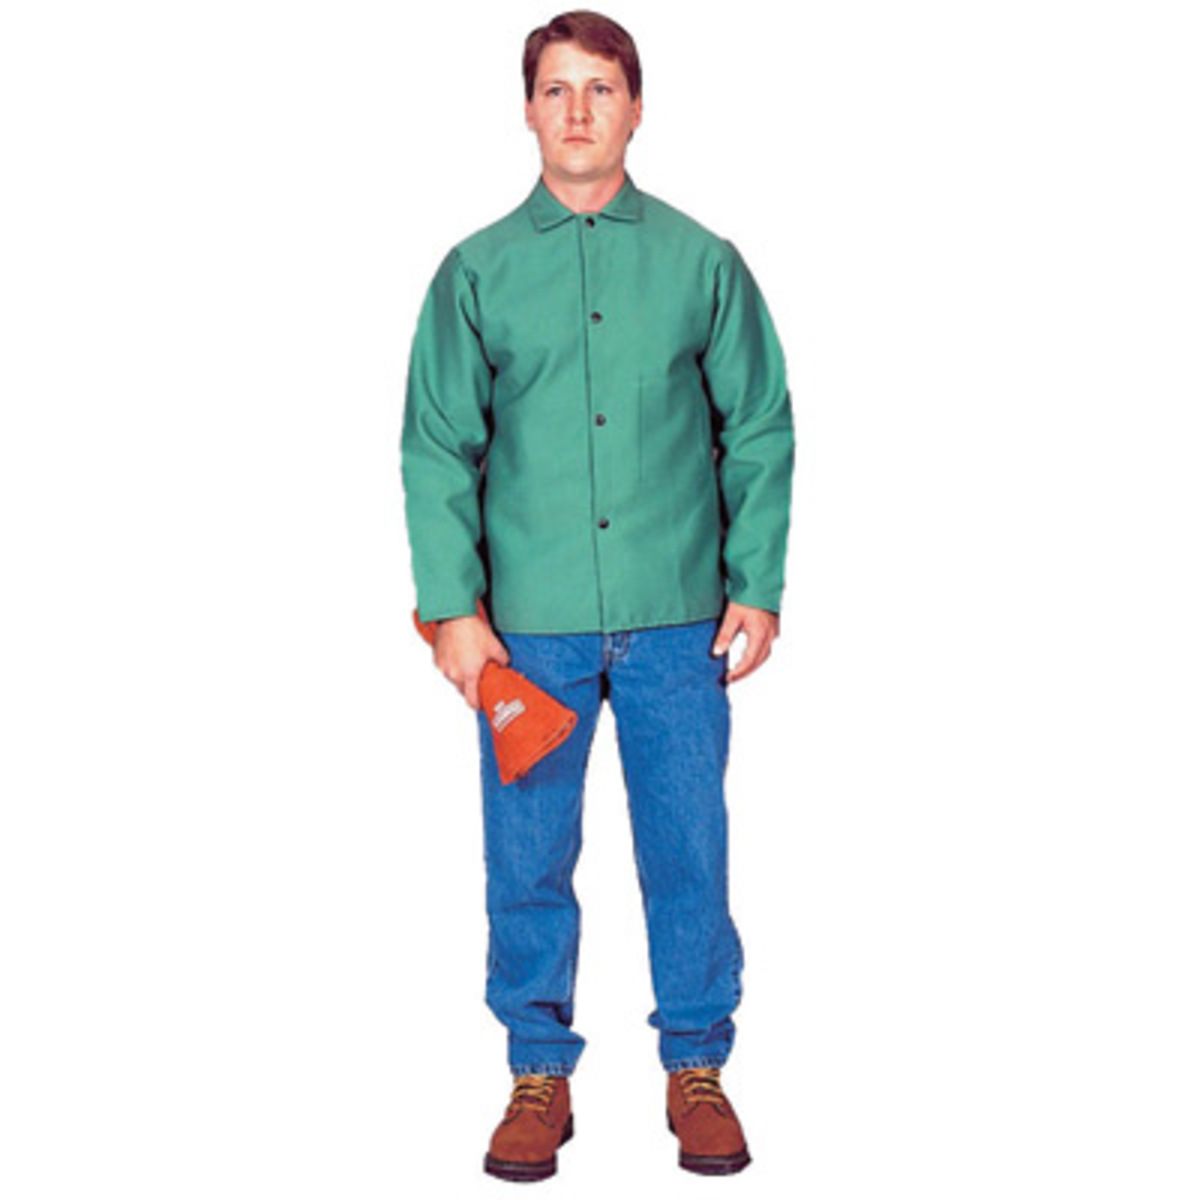 Stanco Safety Products™ Size 4X Green Cotton Flame Resistant Welding Jacket With Snap Closure